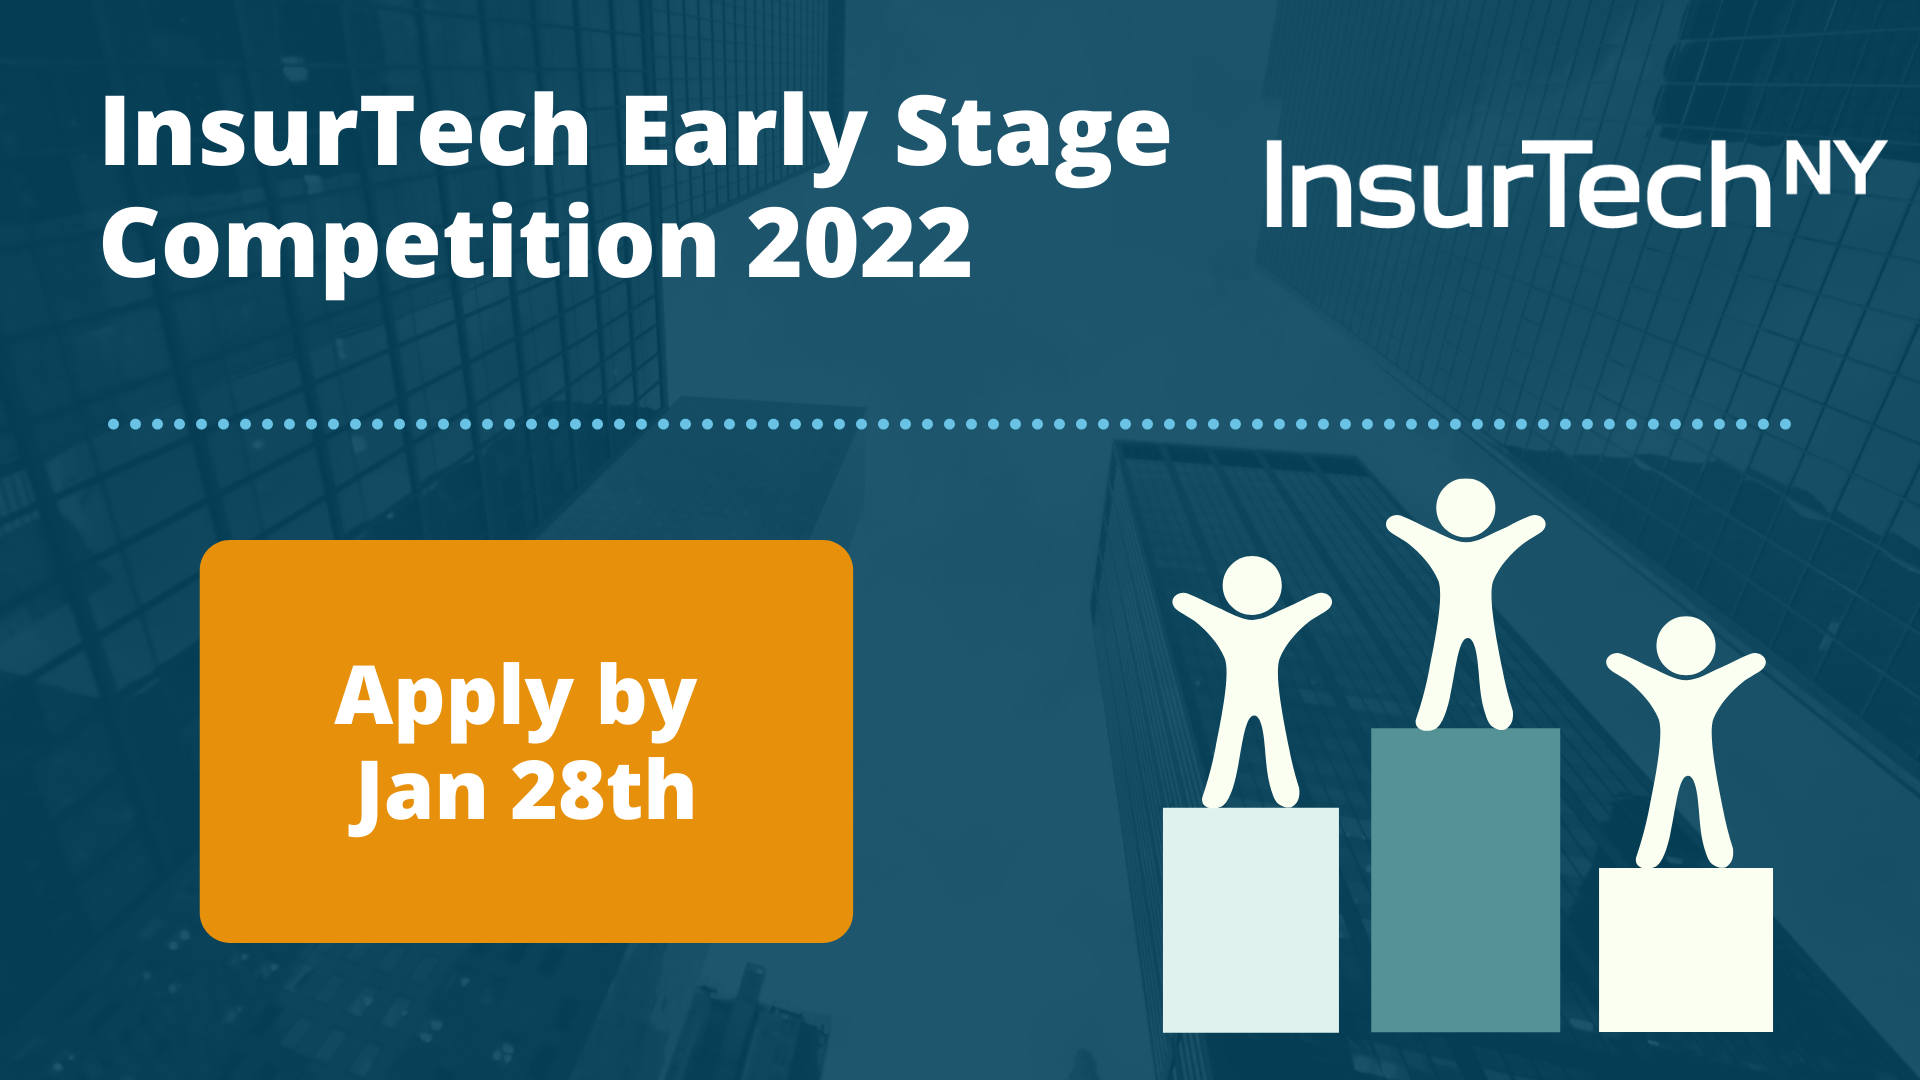 Insurance News for InsurTech Early Stage Competition 2022